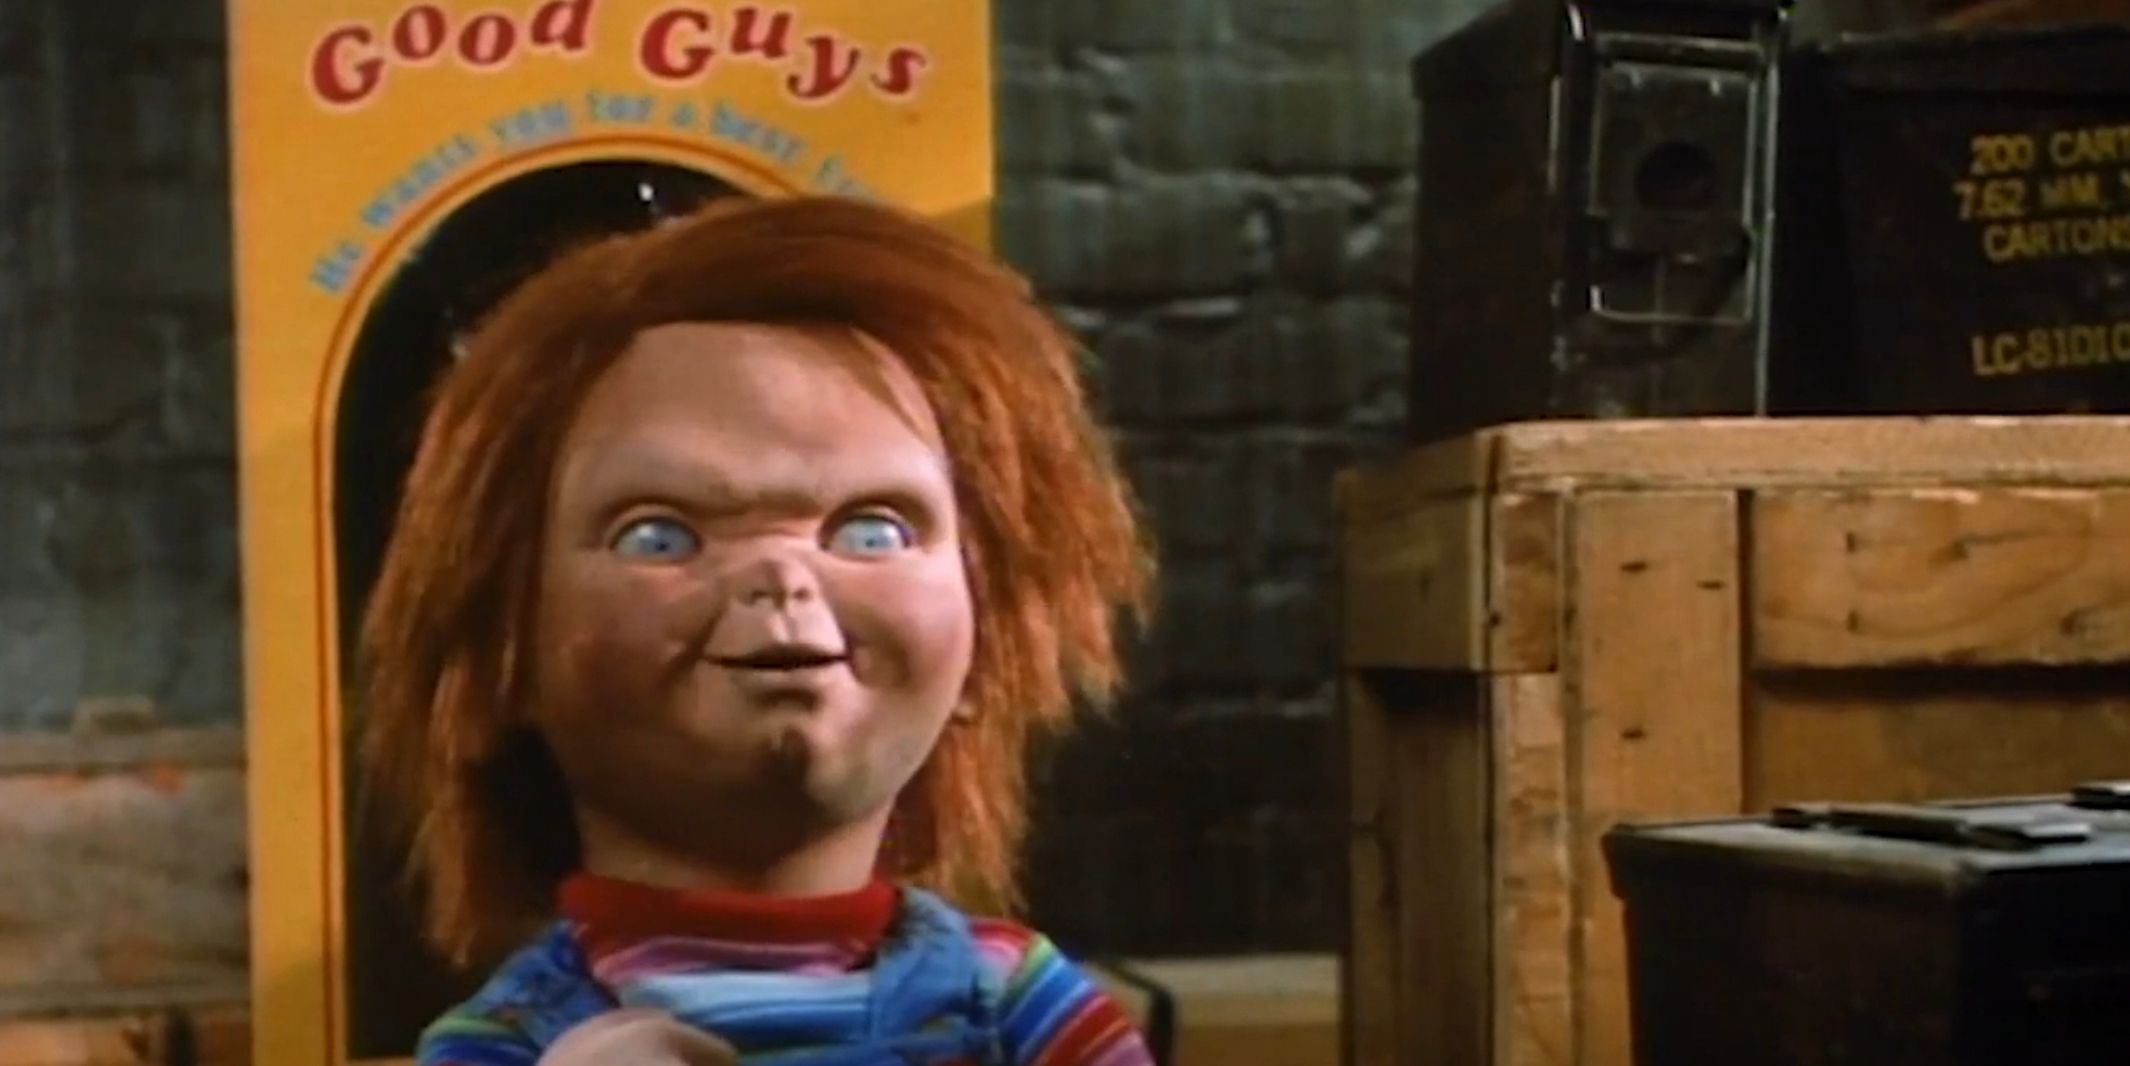 Chucky in front of a Good Guy box in the storage area in Childs Play 3